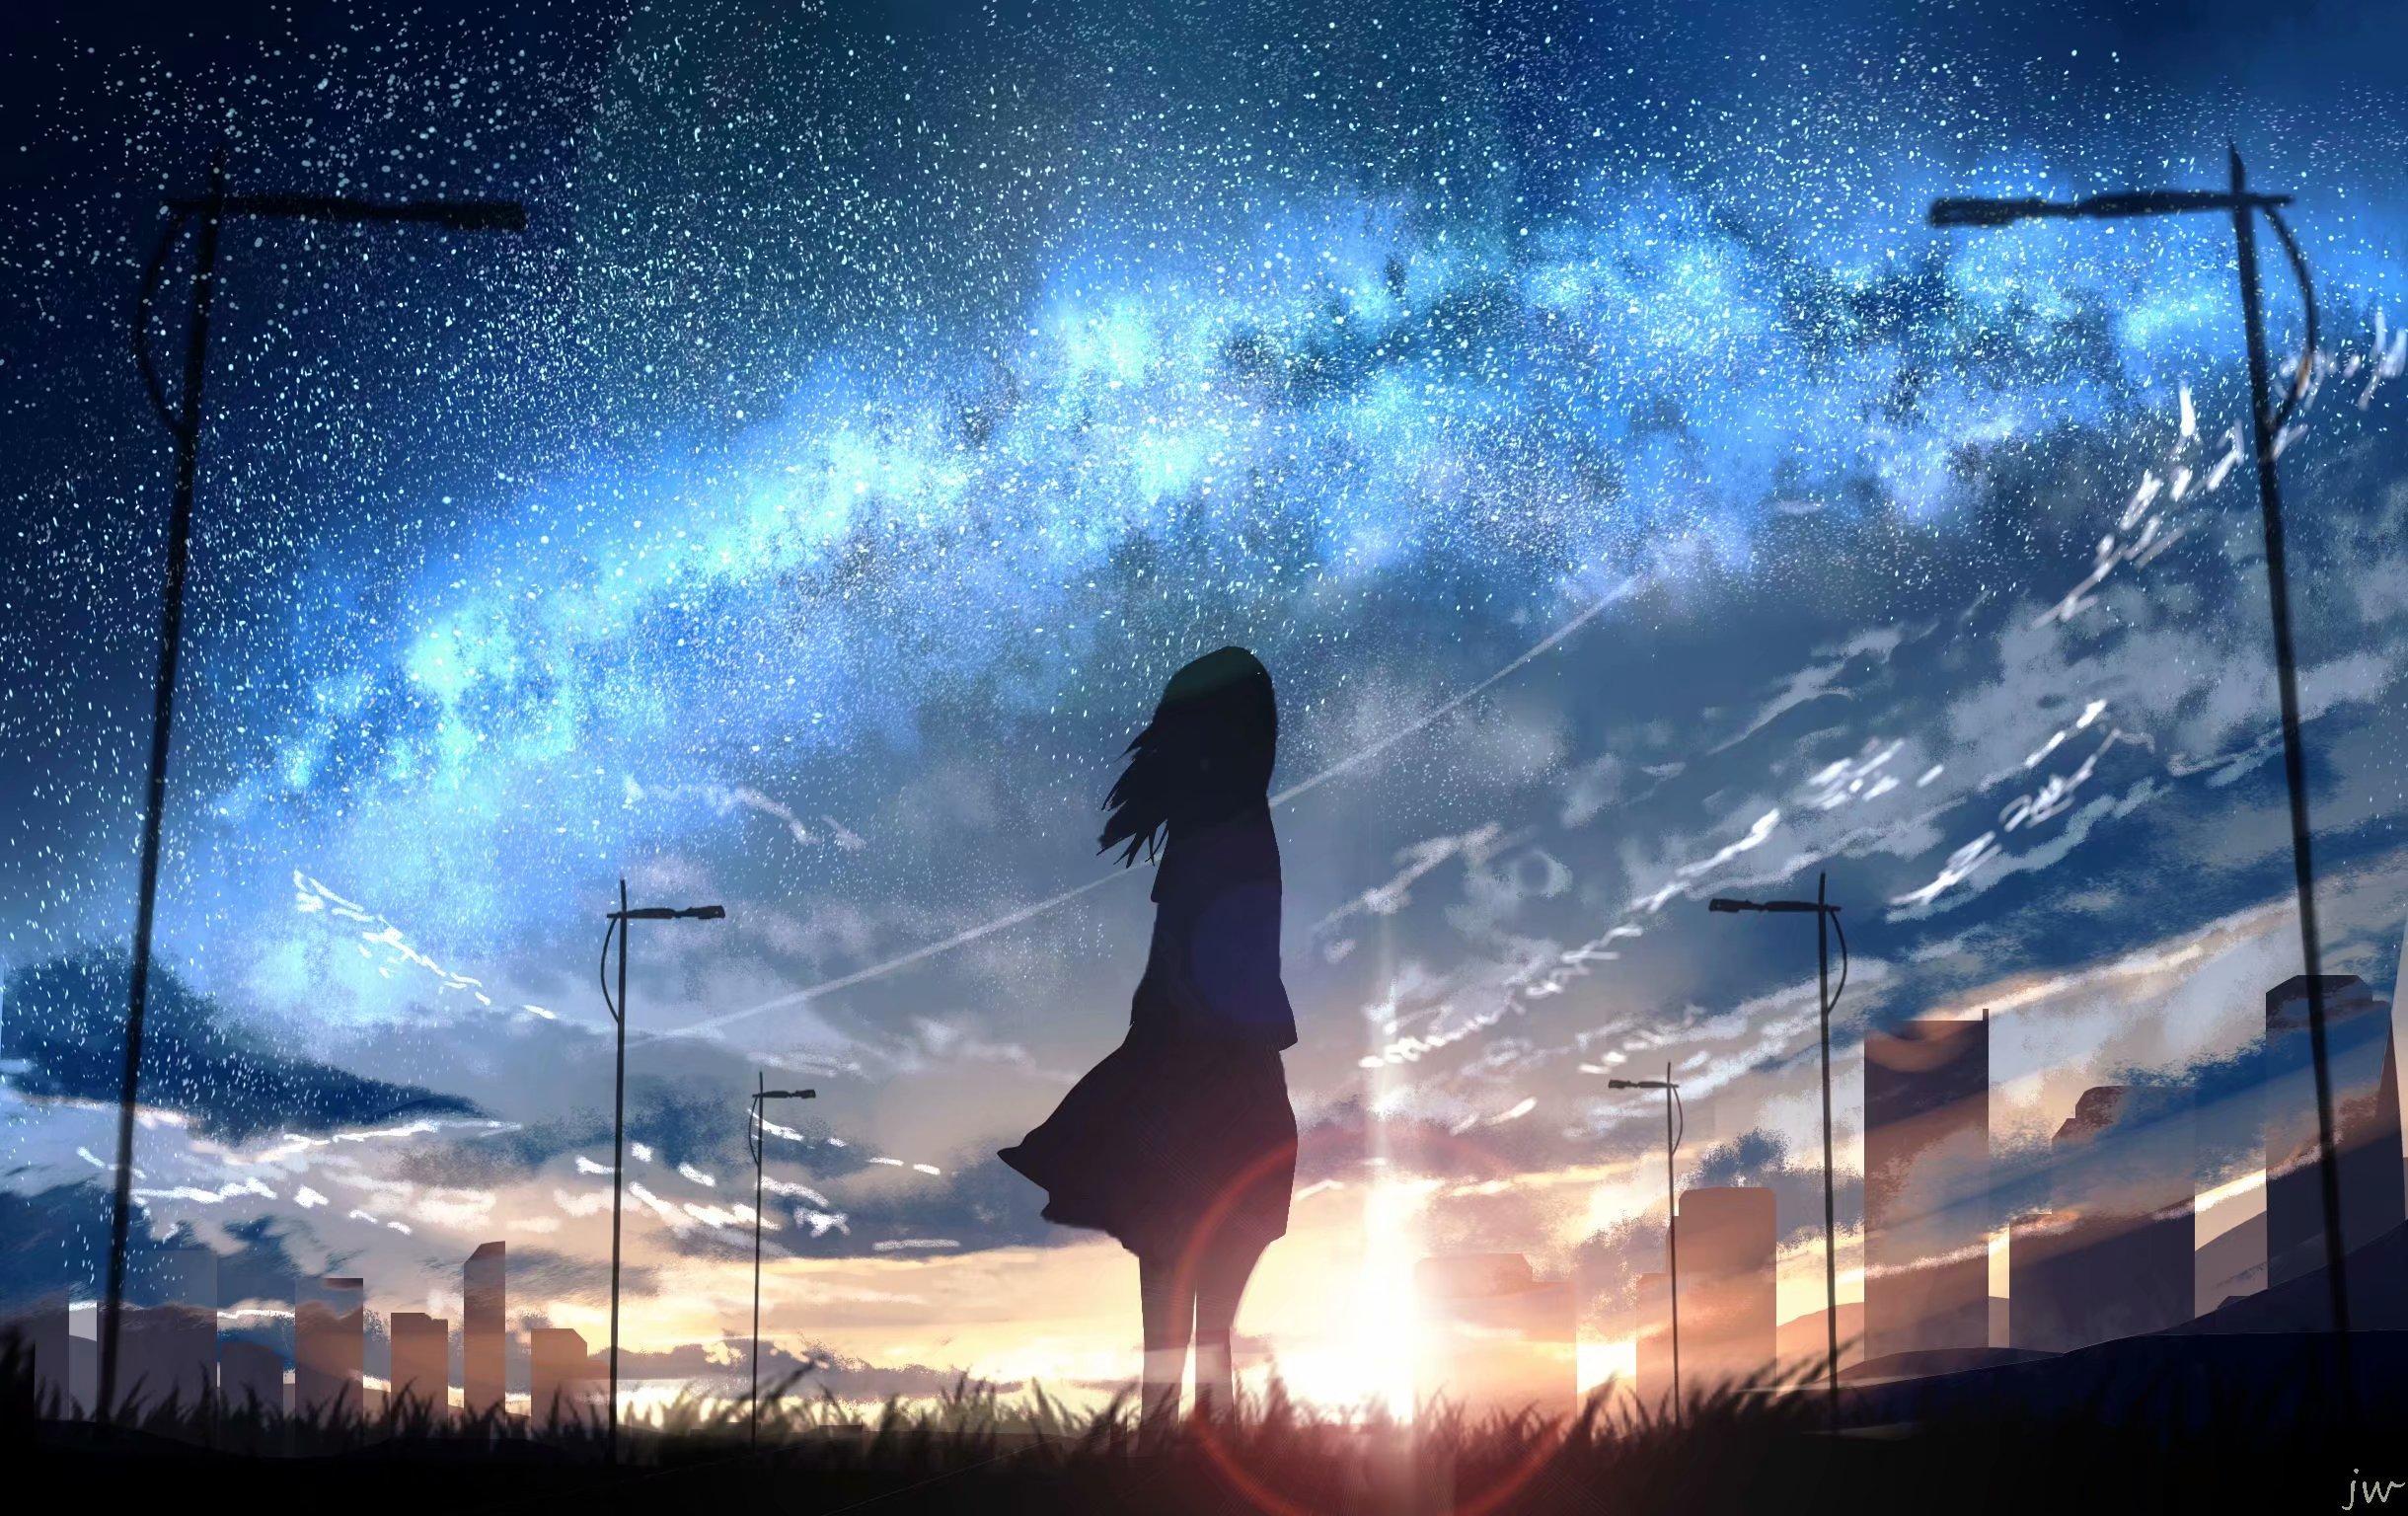 Scenery Anime Background Sad / Anime scenery backgrounds - SF Wallpaper